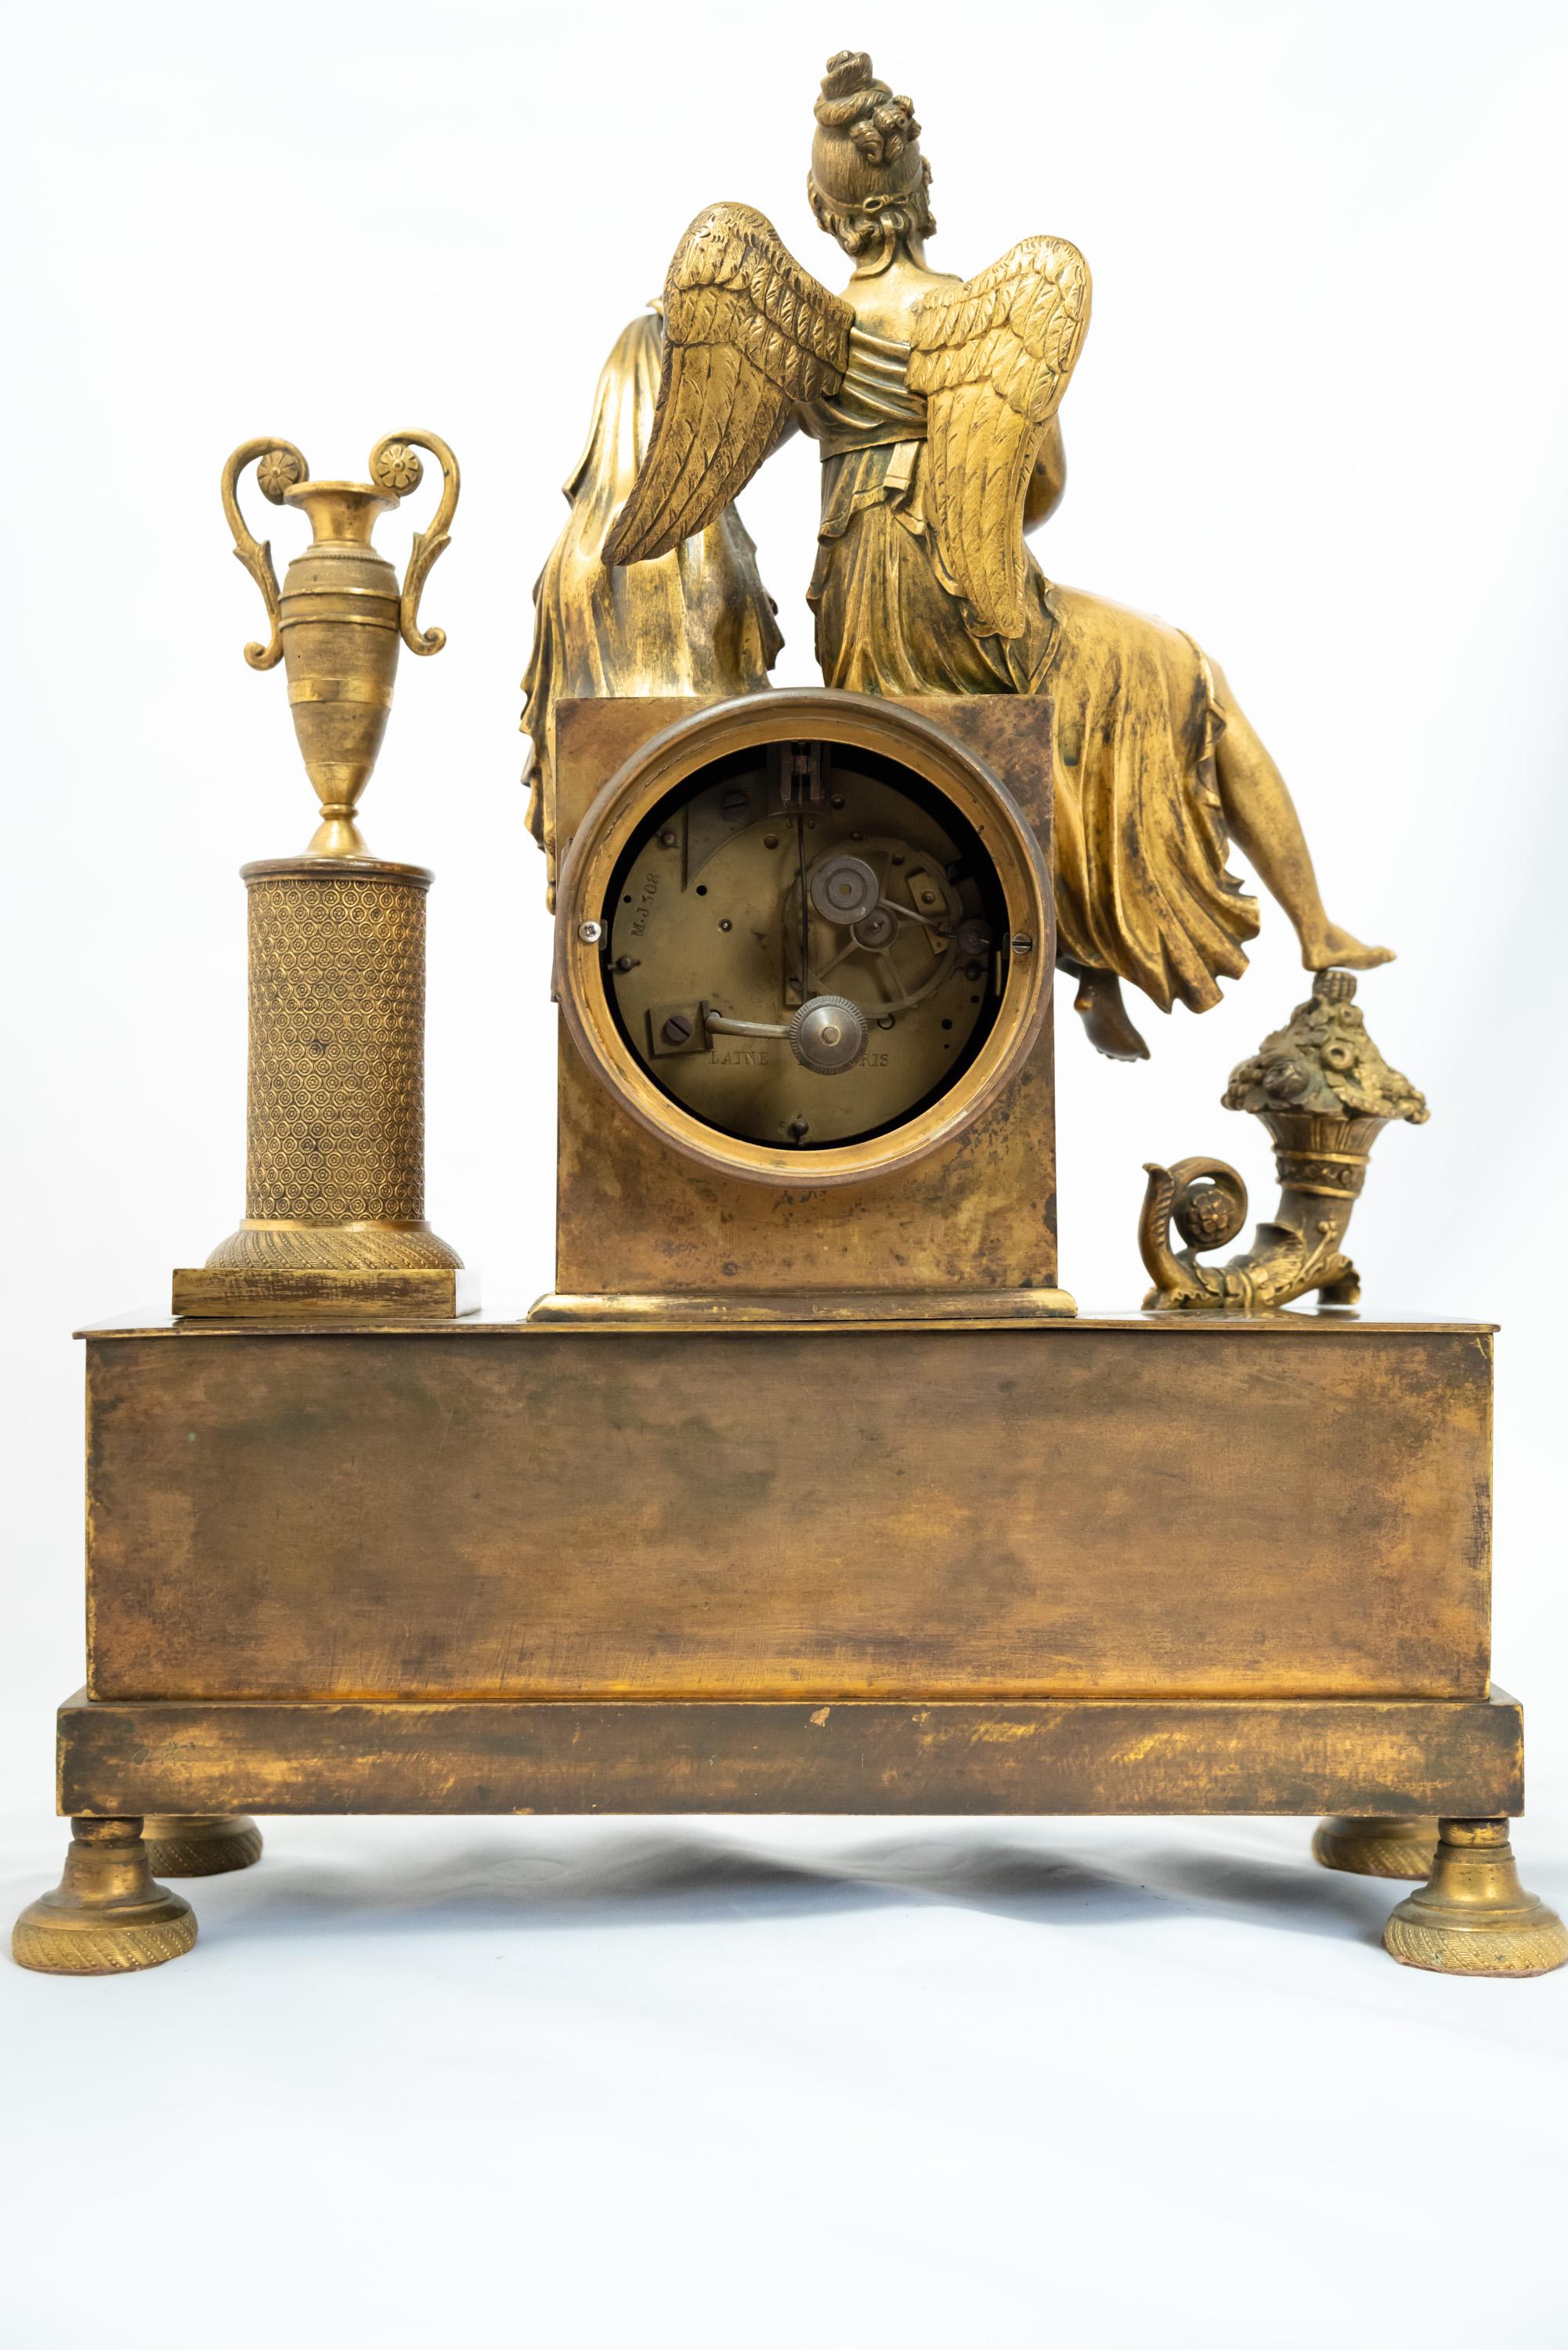 Seated Female Figure in French Fire-Gilt Clock from Empire Era In Good Condition For Sale In 263-0031, JP